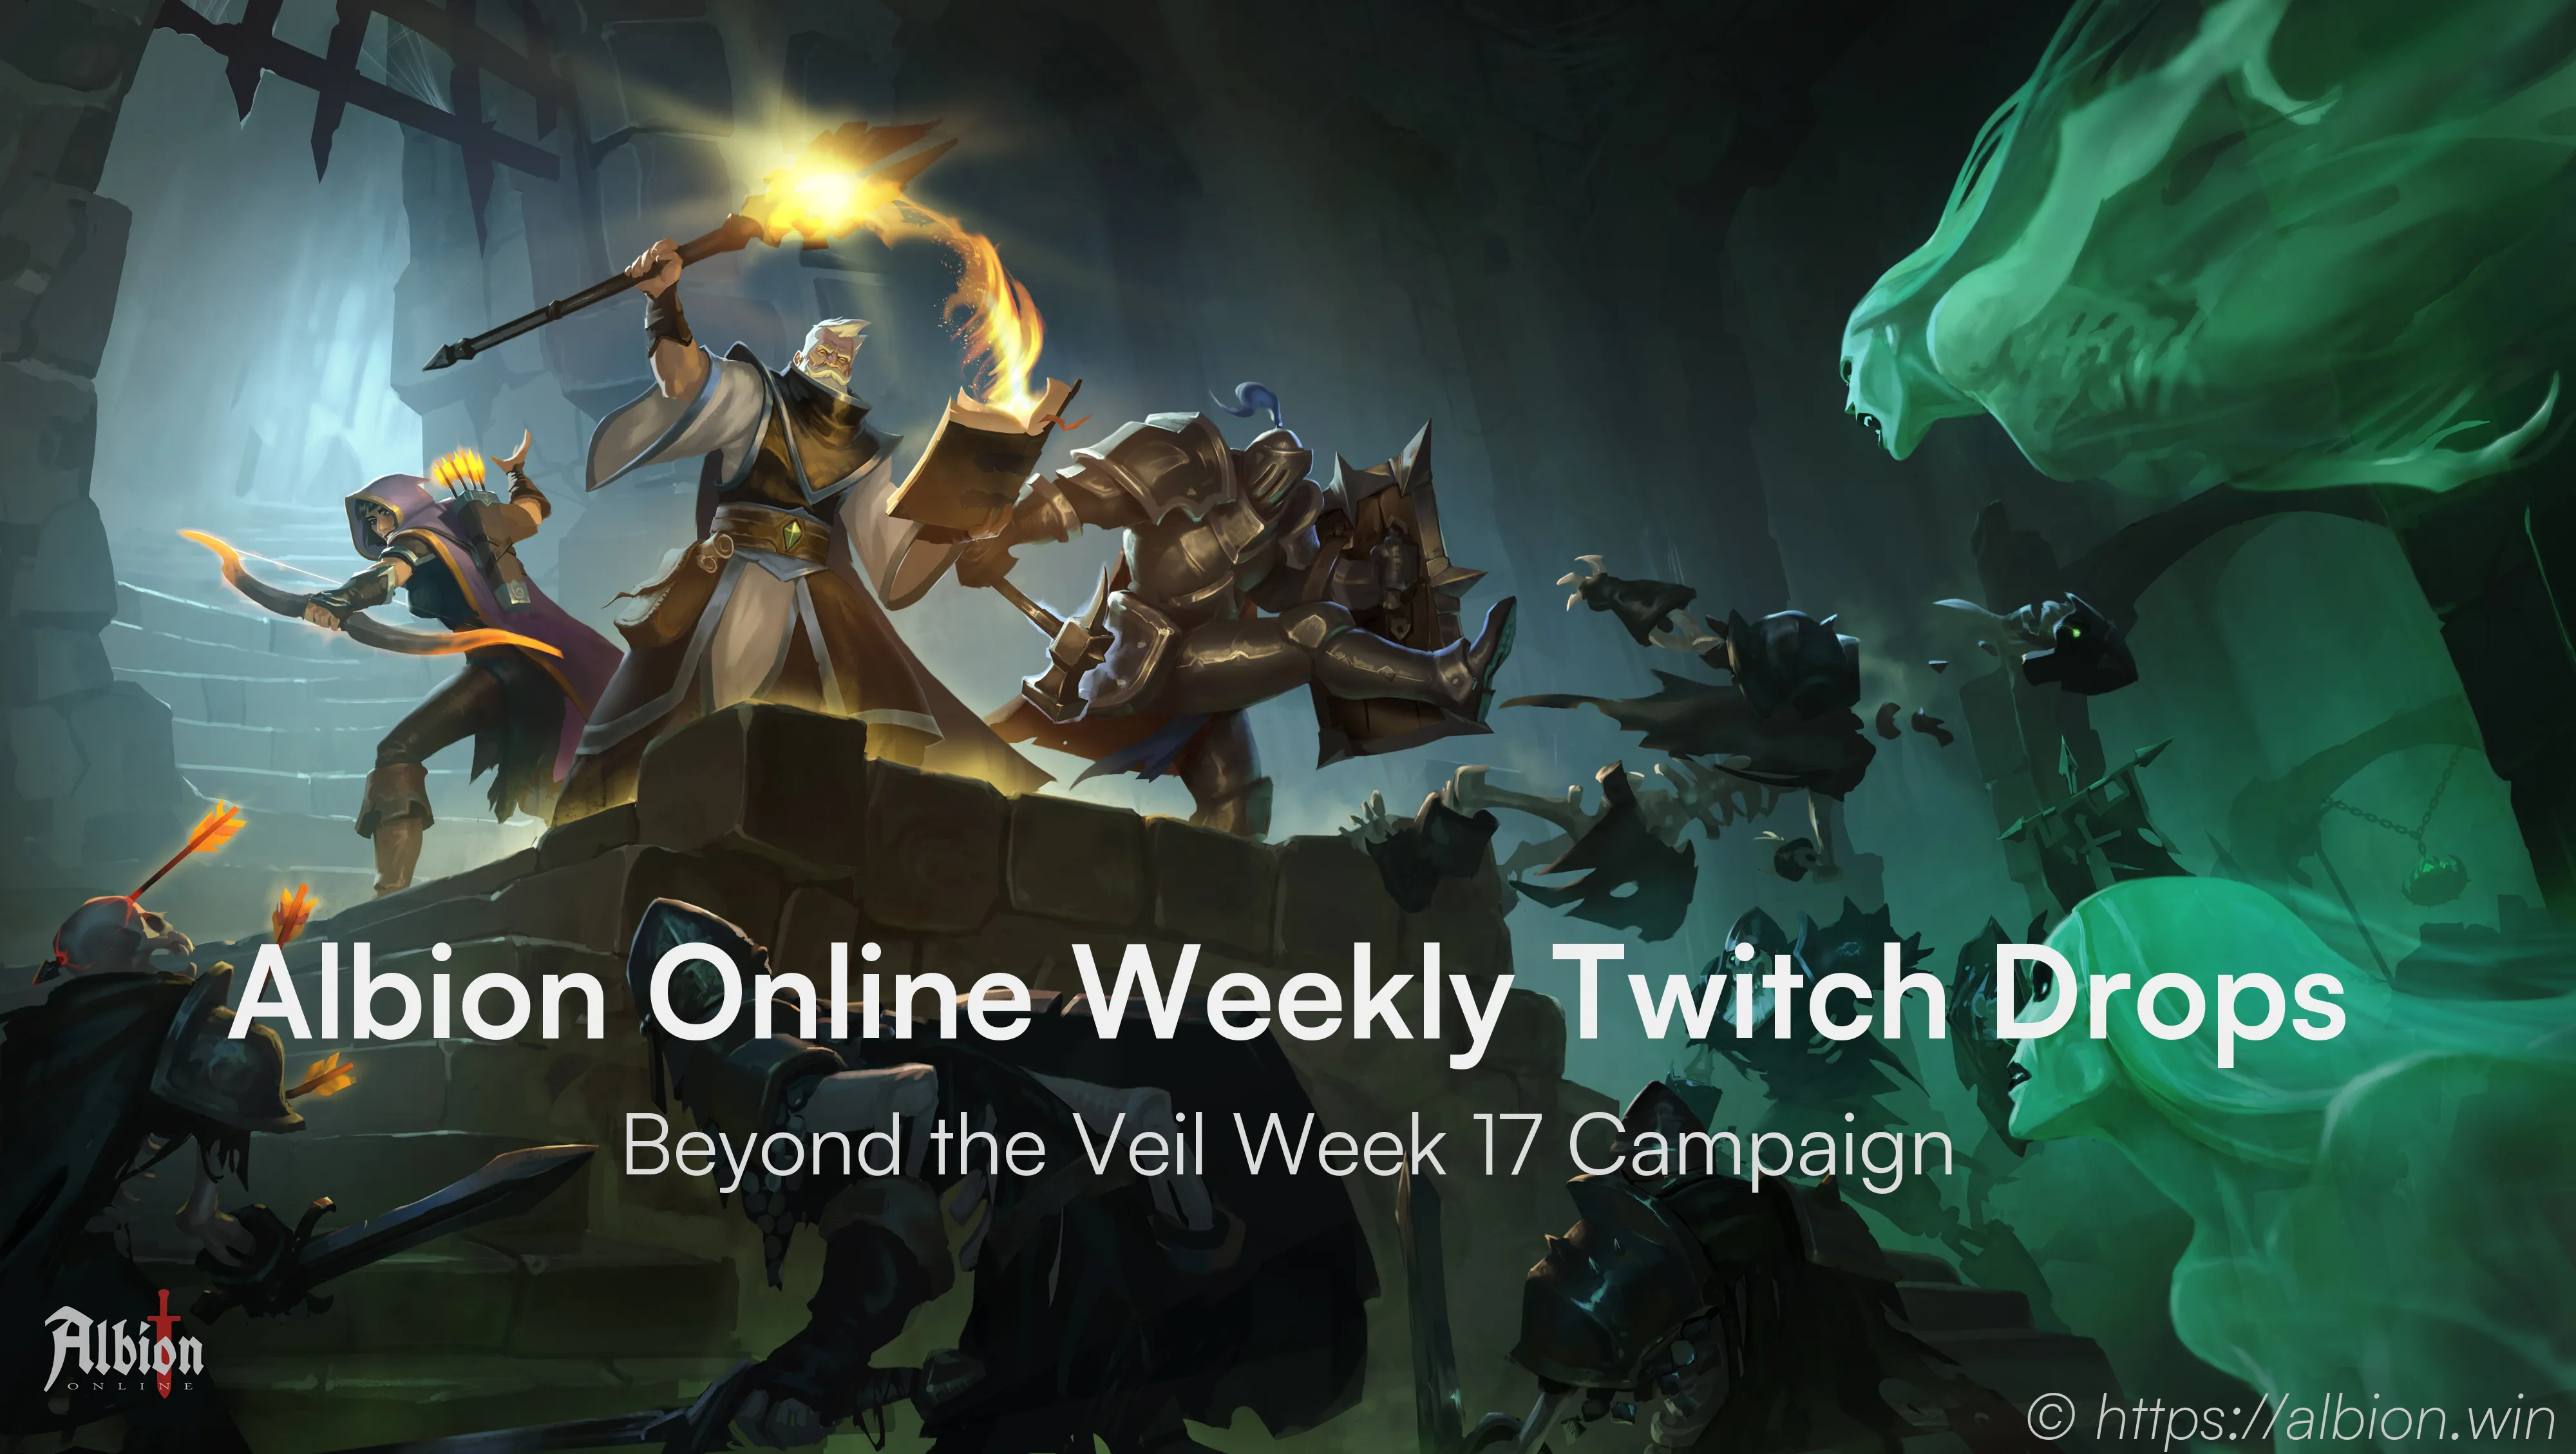 Albion Online Beyond the Veil update adds massive MMO content drop